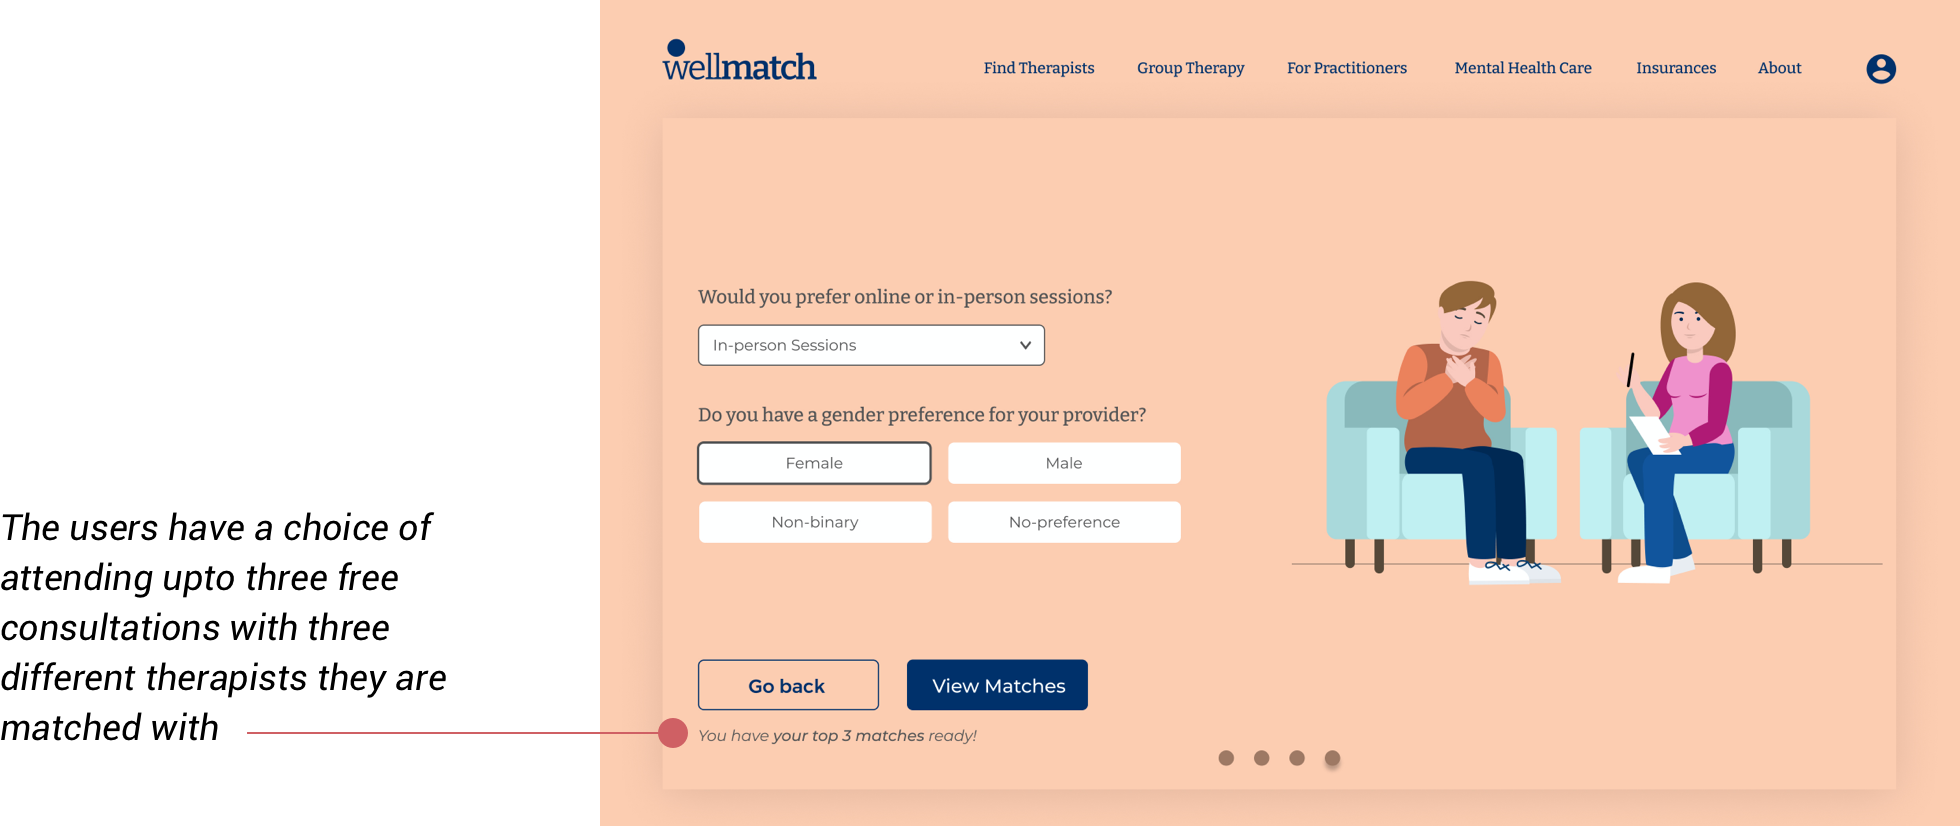 WellMatch - The users have a choice of attending upto three free consultations with three different therapists they are matched with